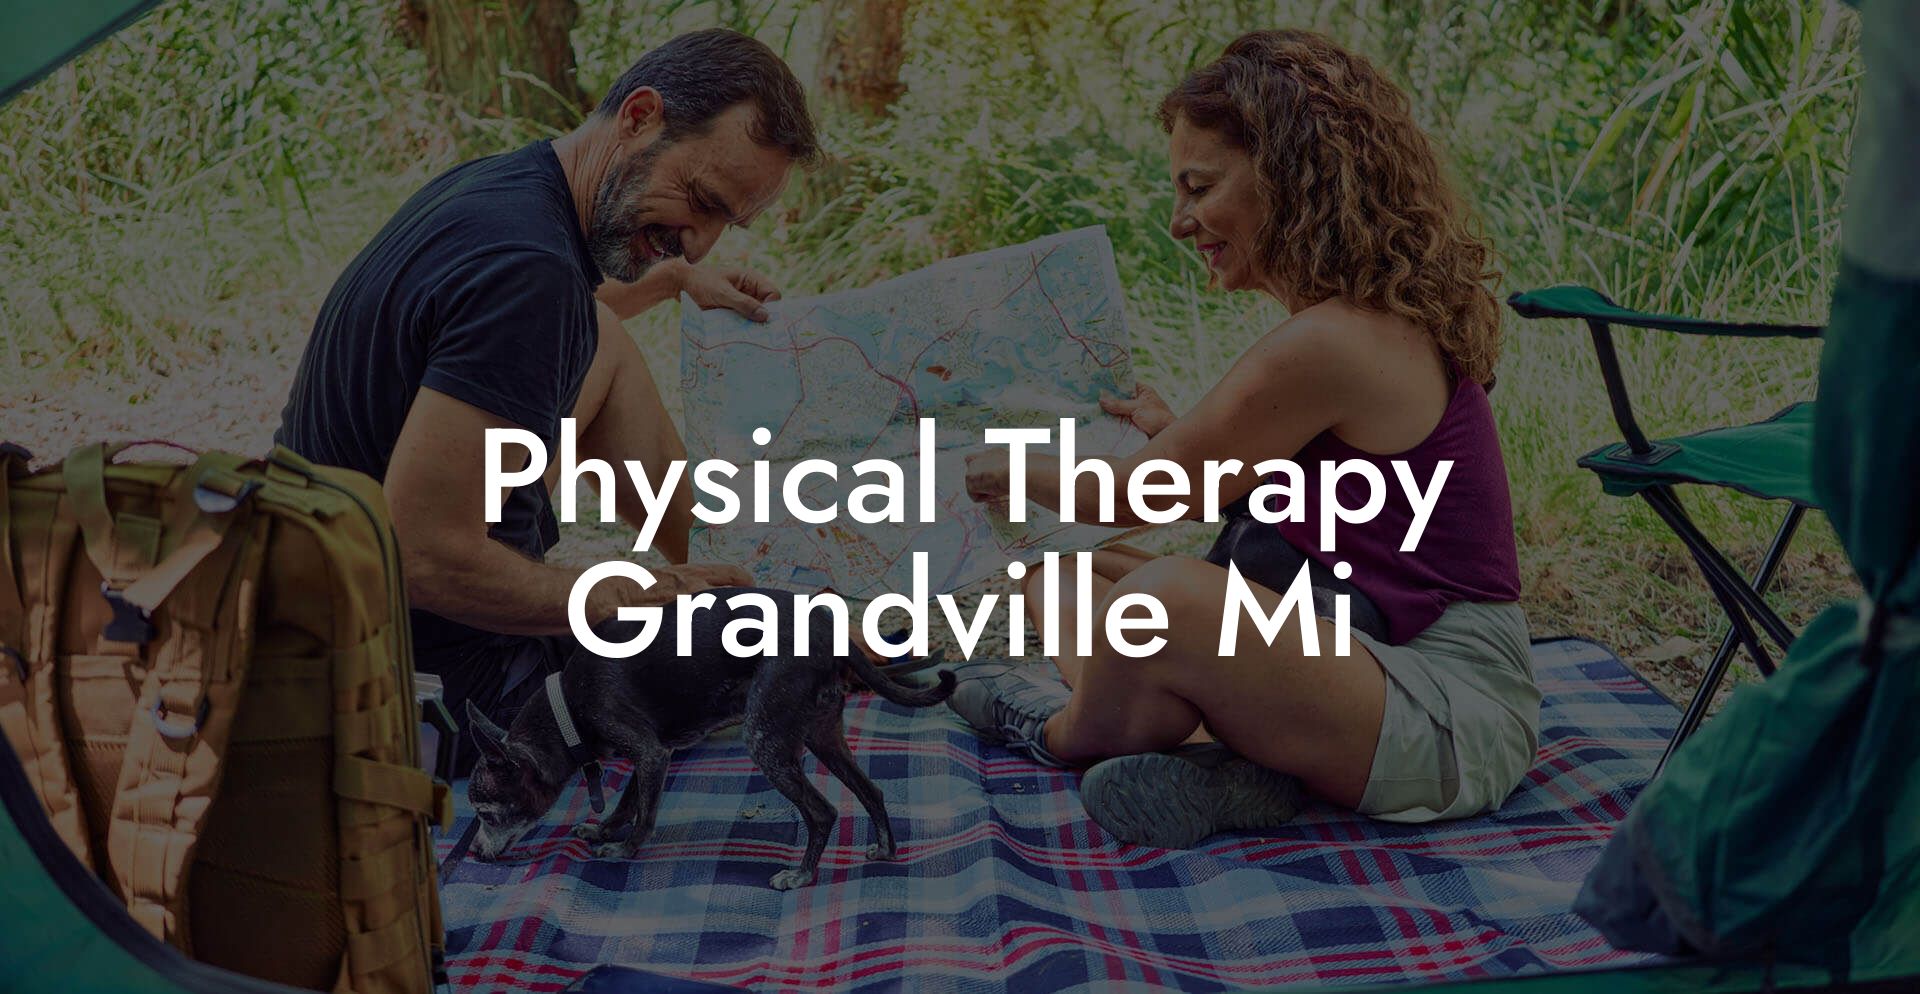 Physical Therapy Grandville Mi